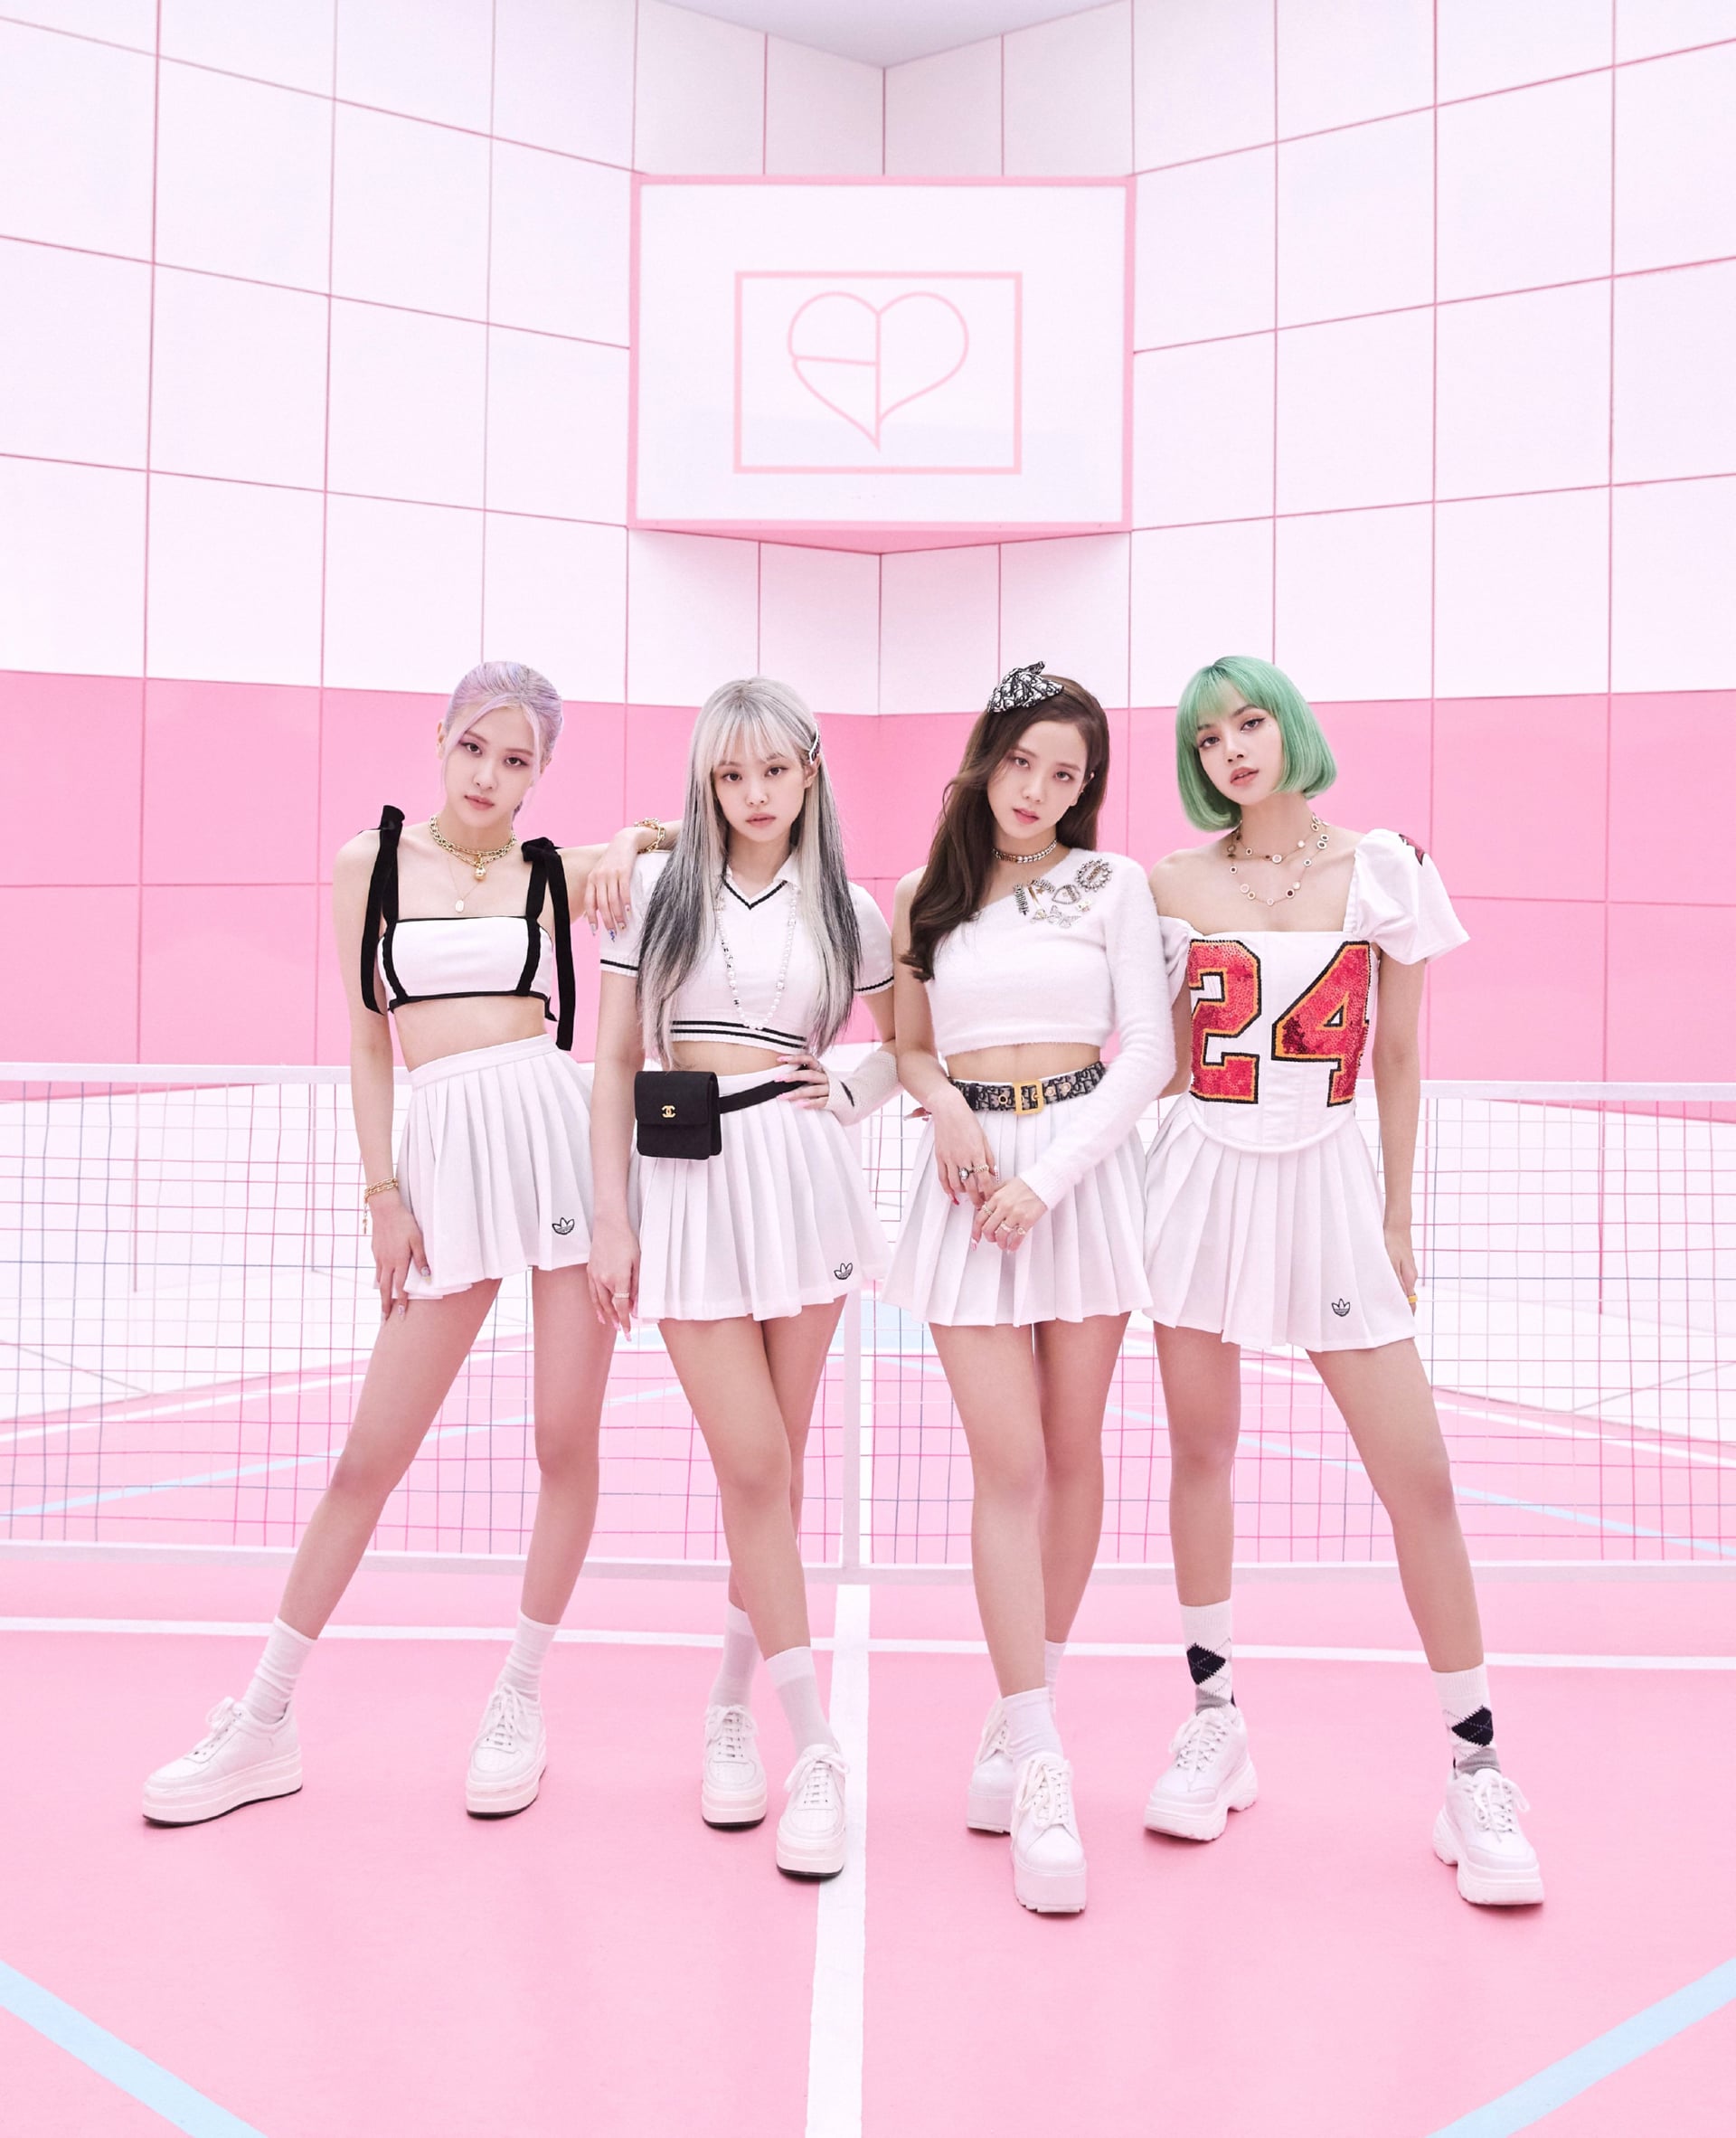 Blackpink - Ice Cream wallpapers HD quality